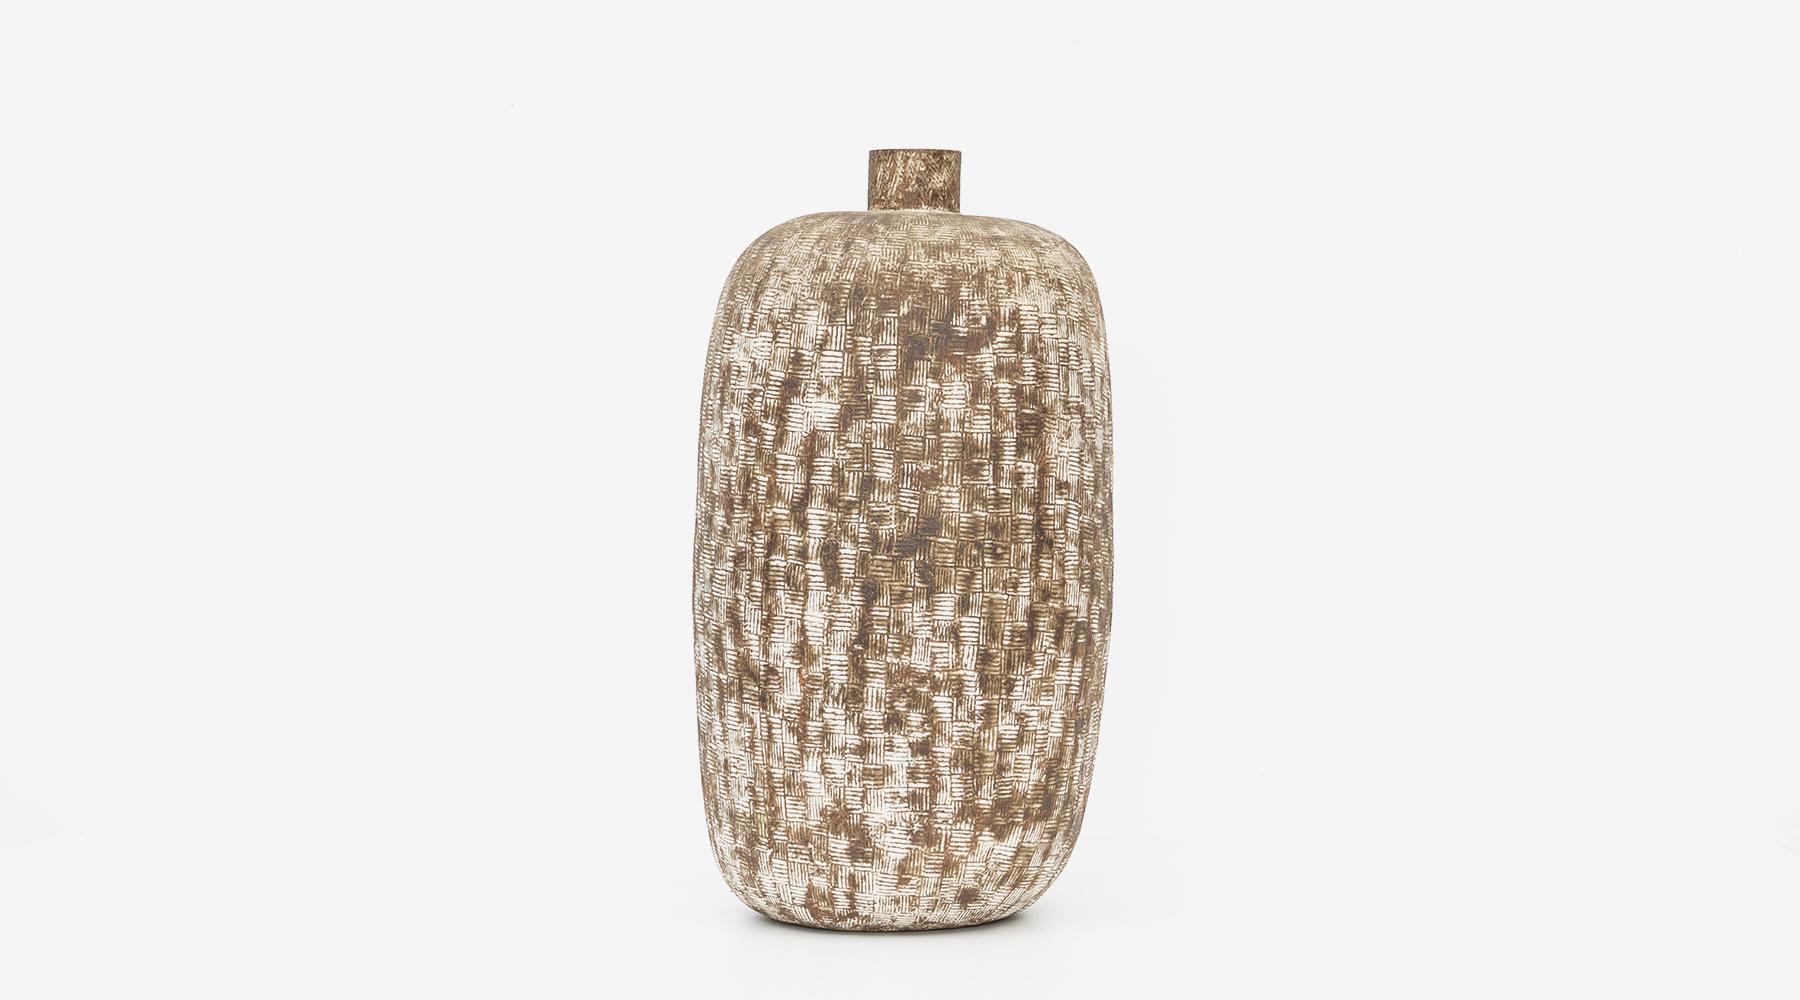 Metate Vase, ceramic by Claude Conover, USA, 1960.

The stoneware of Claude Conover has its roots in Primitive sculpture and recalls the appearance of ancient vessels. Each piece of Claude Conover´s stoneware is hand formed. No two are alike, they